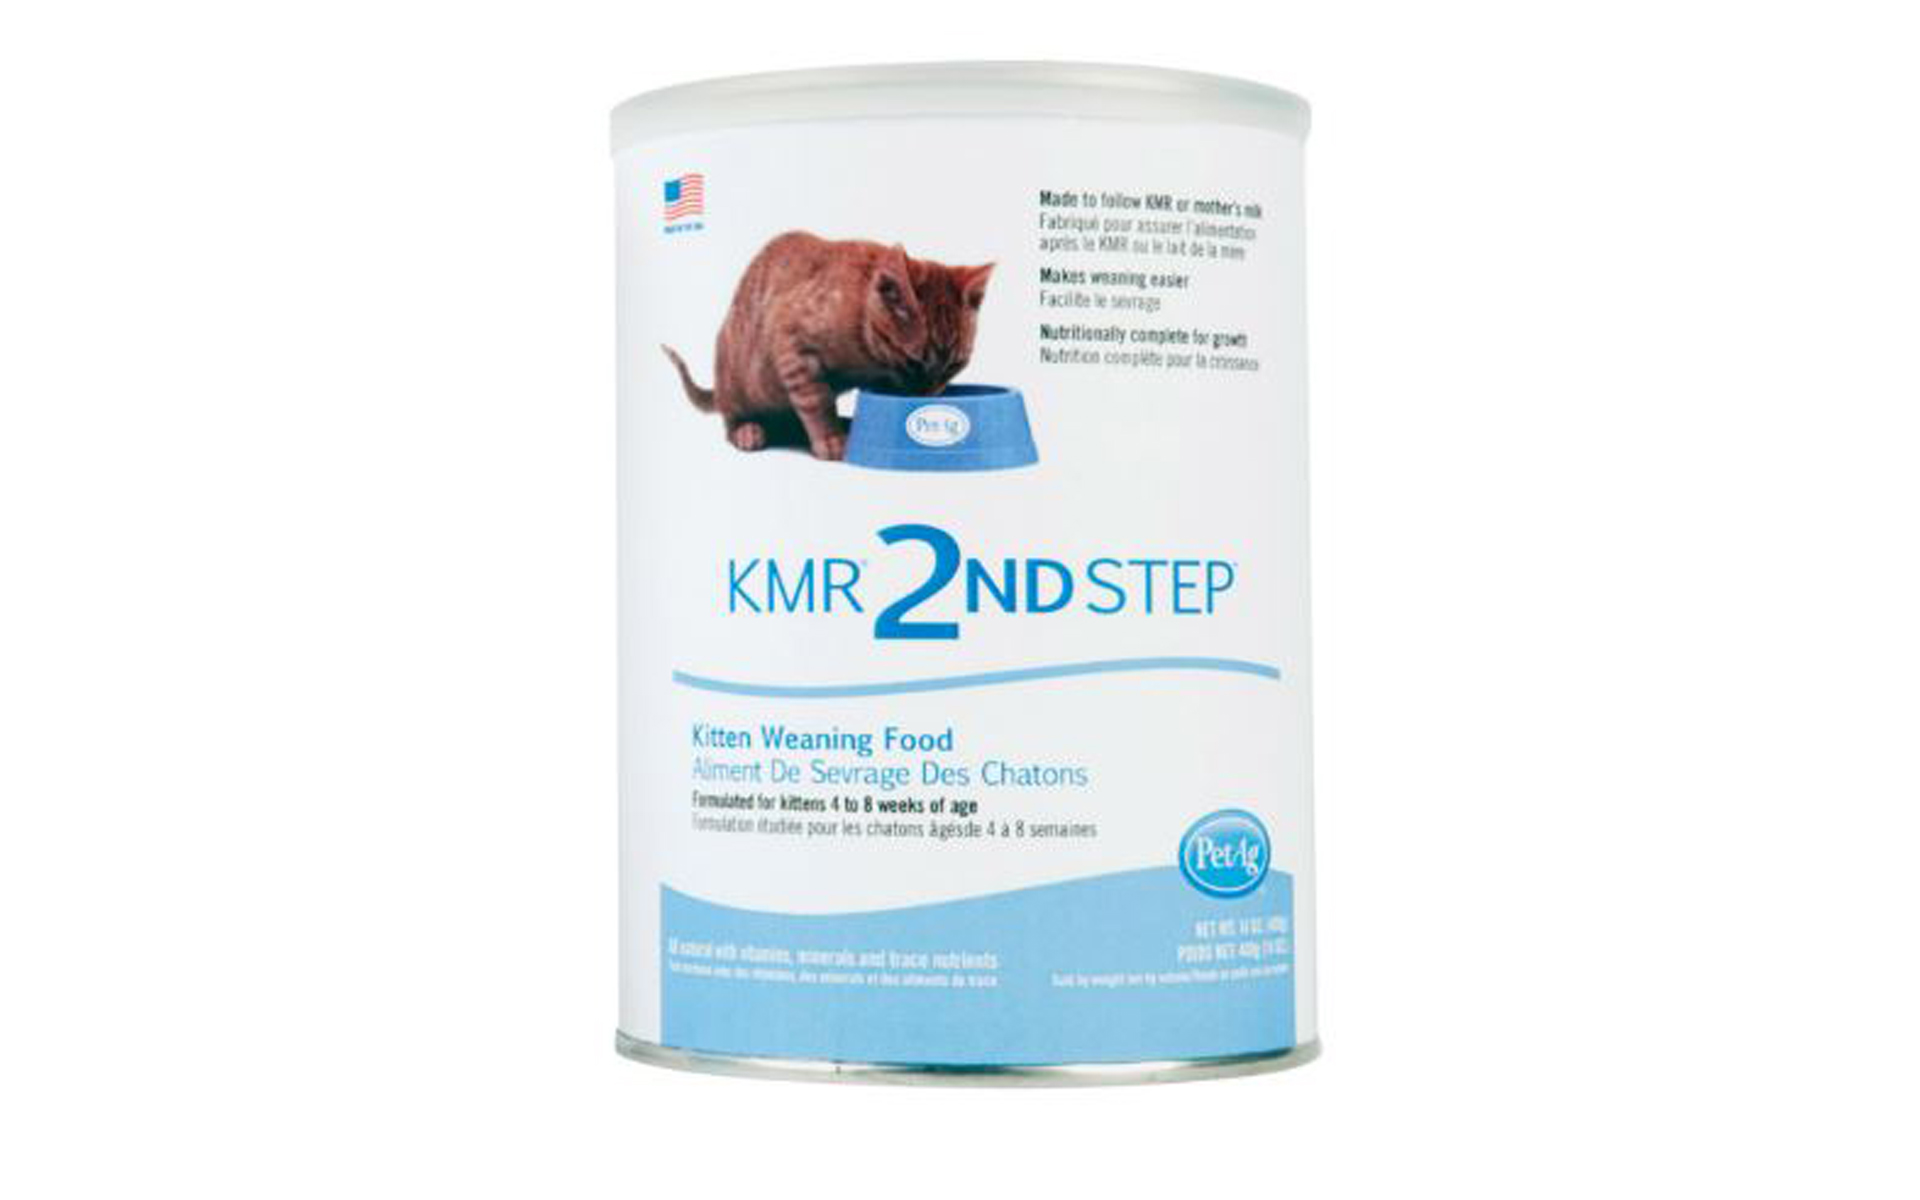 KMR 2nd Step Weaning Formula for Kittens